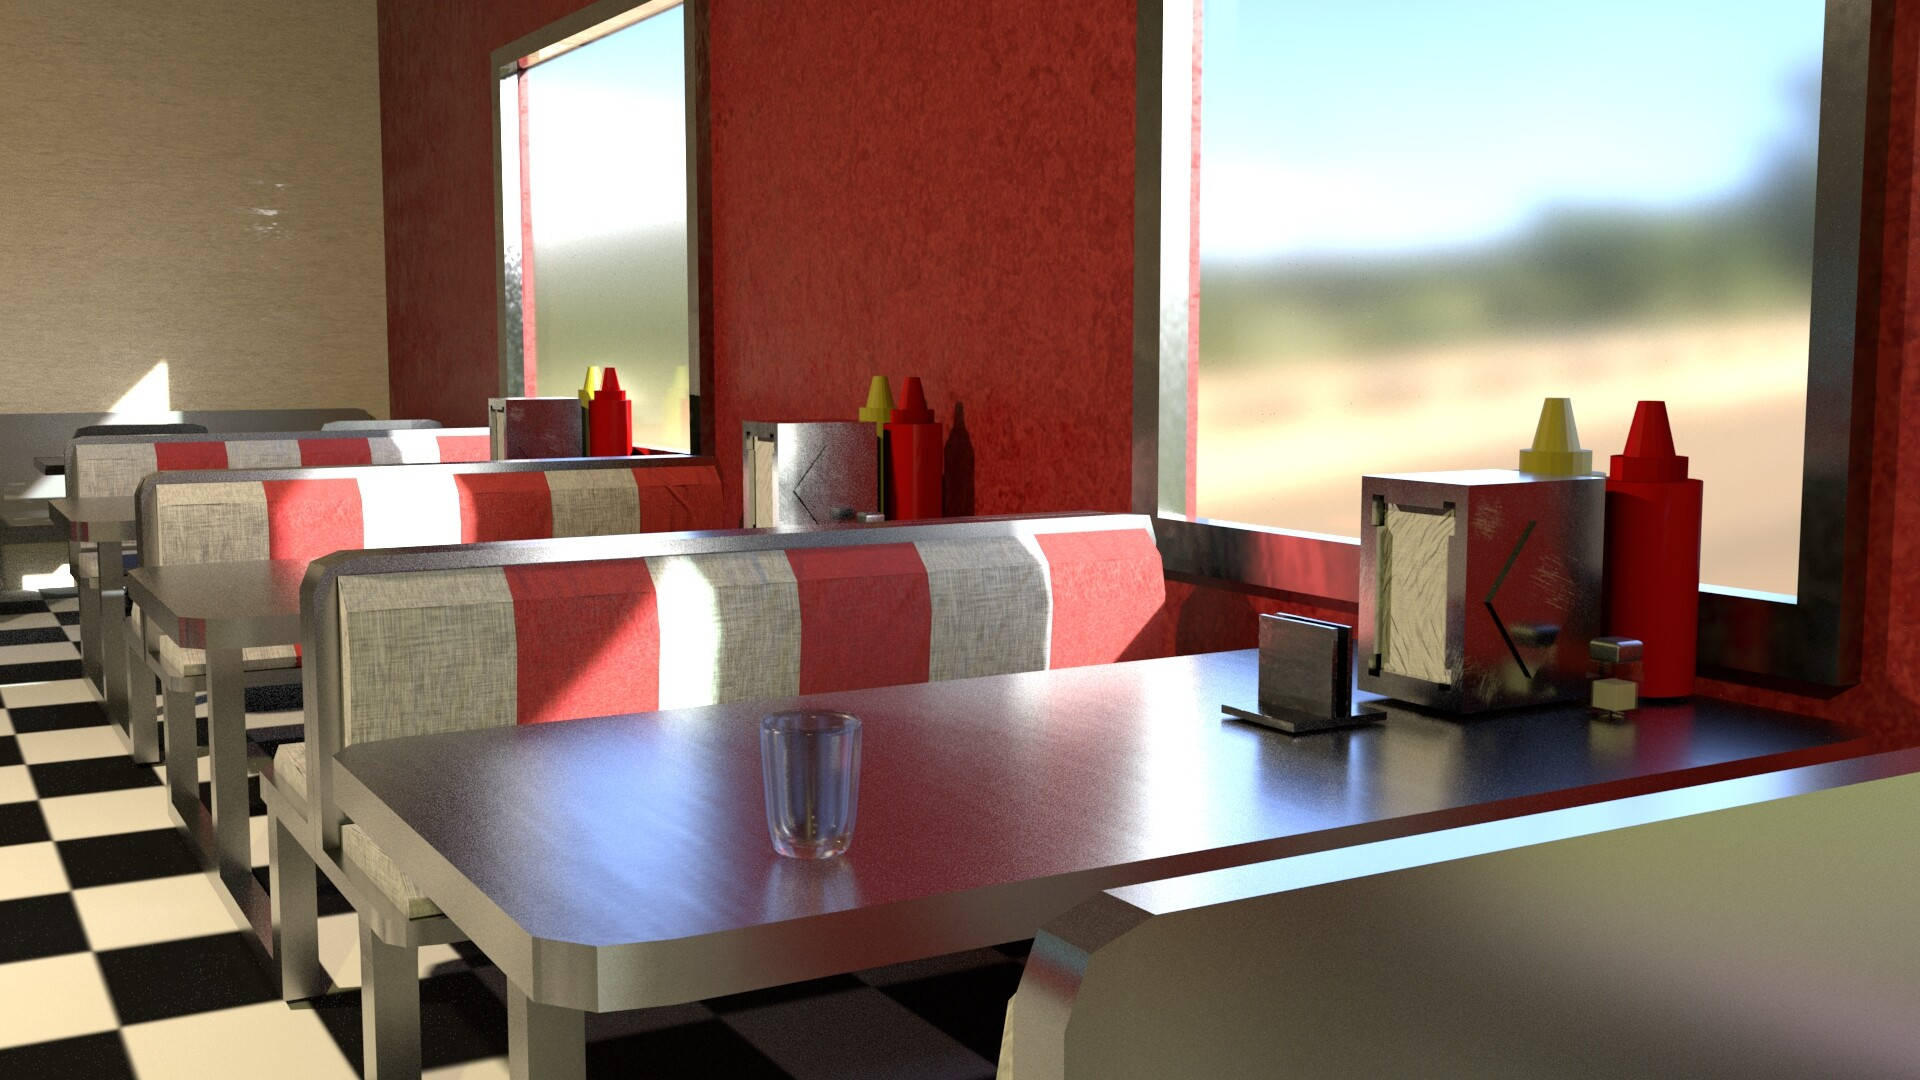 Stainless Table 50s Diner Wallpaper